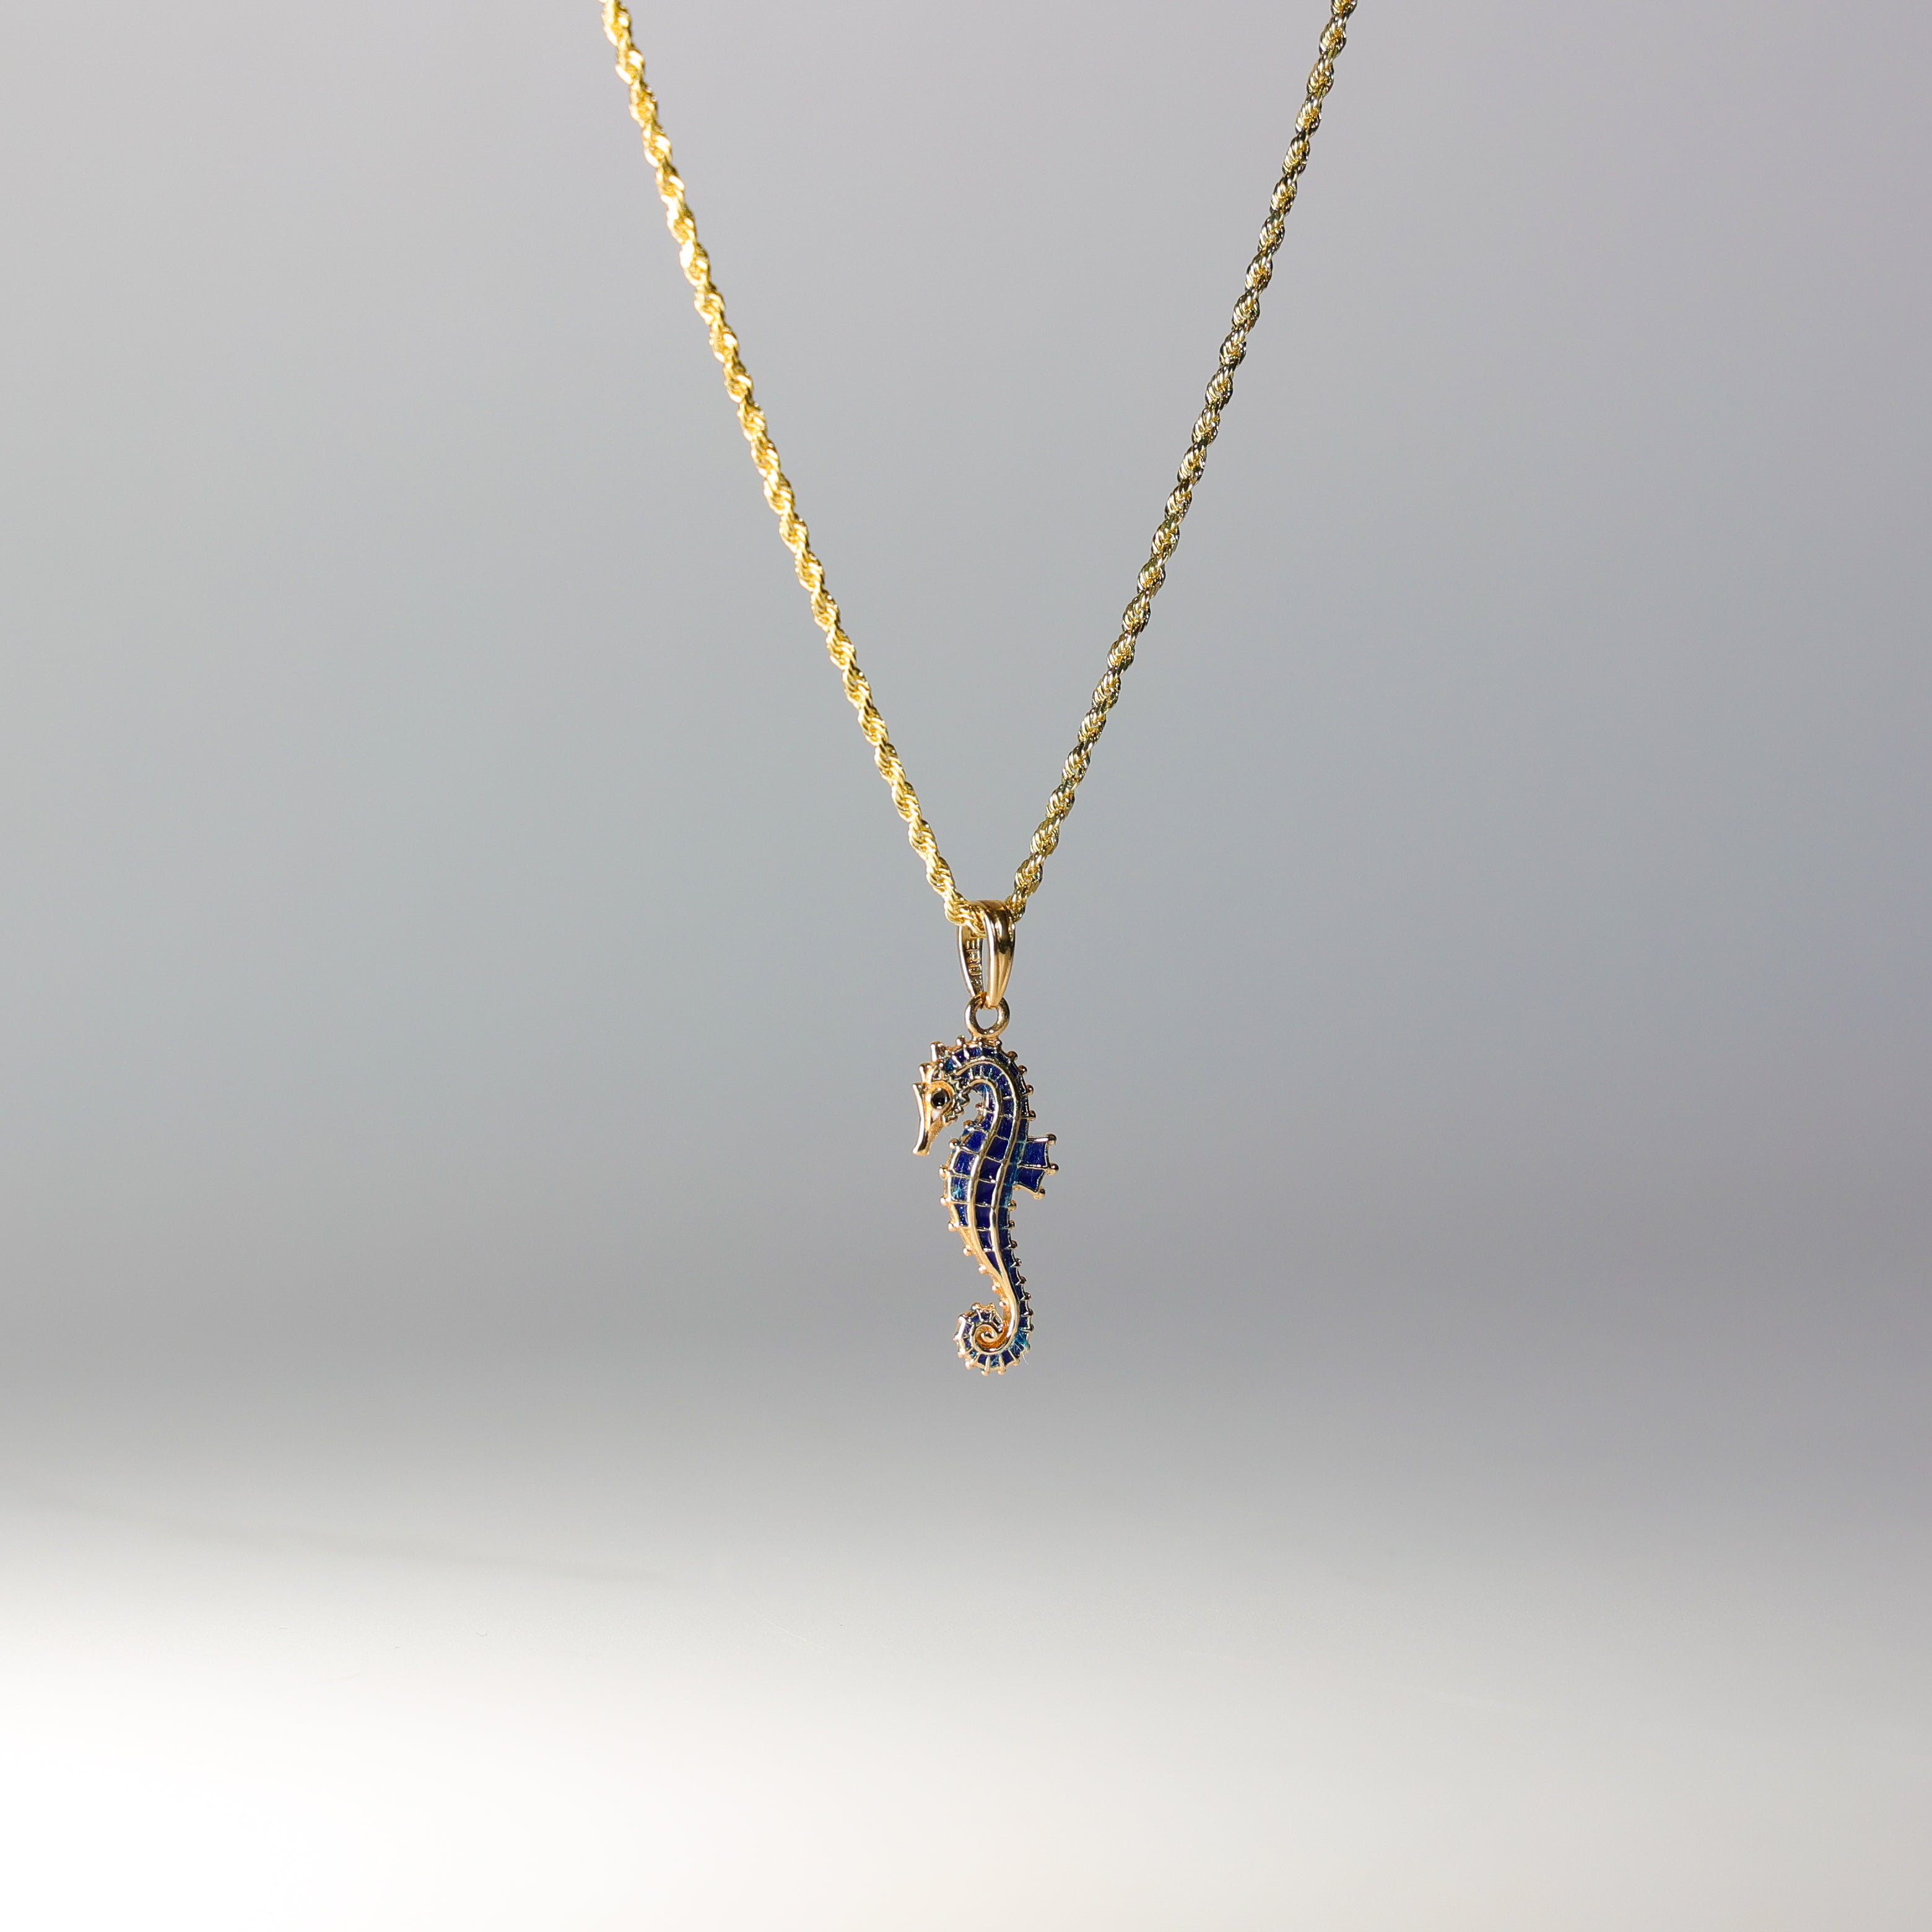 14K Gold 3D Blue Enameled Seahorse Pendant - Charlie & Co. Jewelry